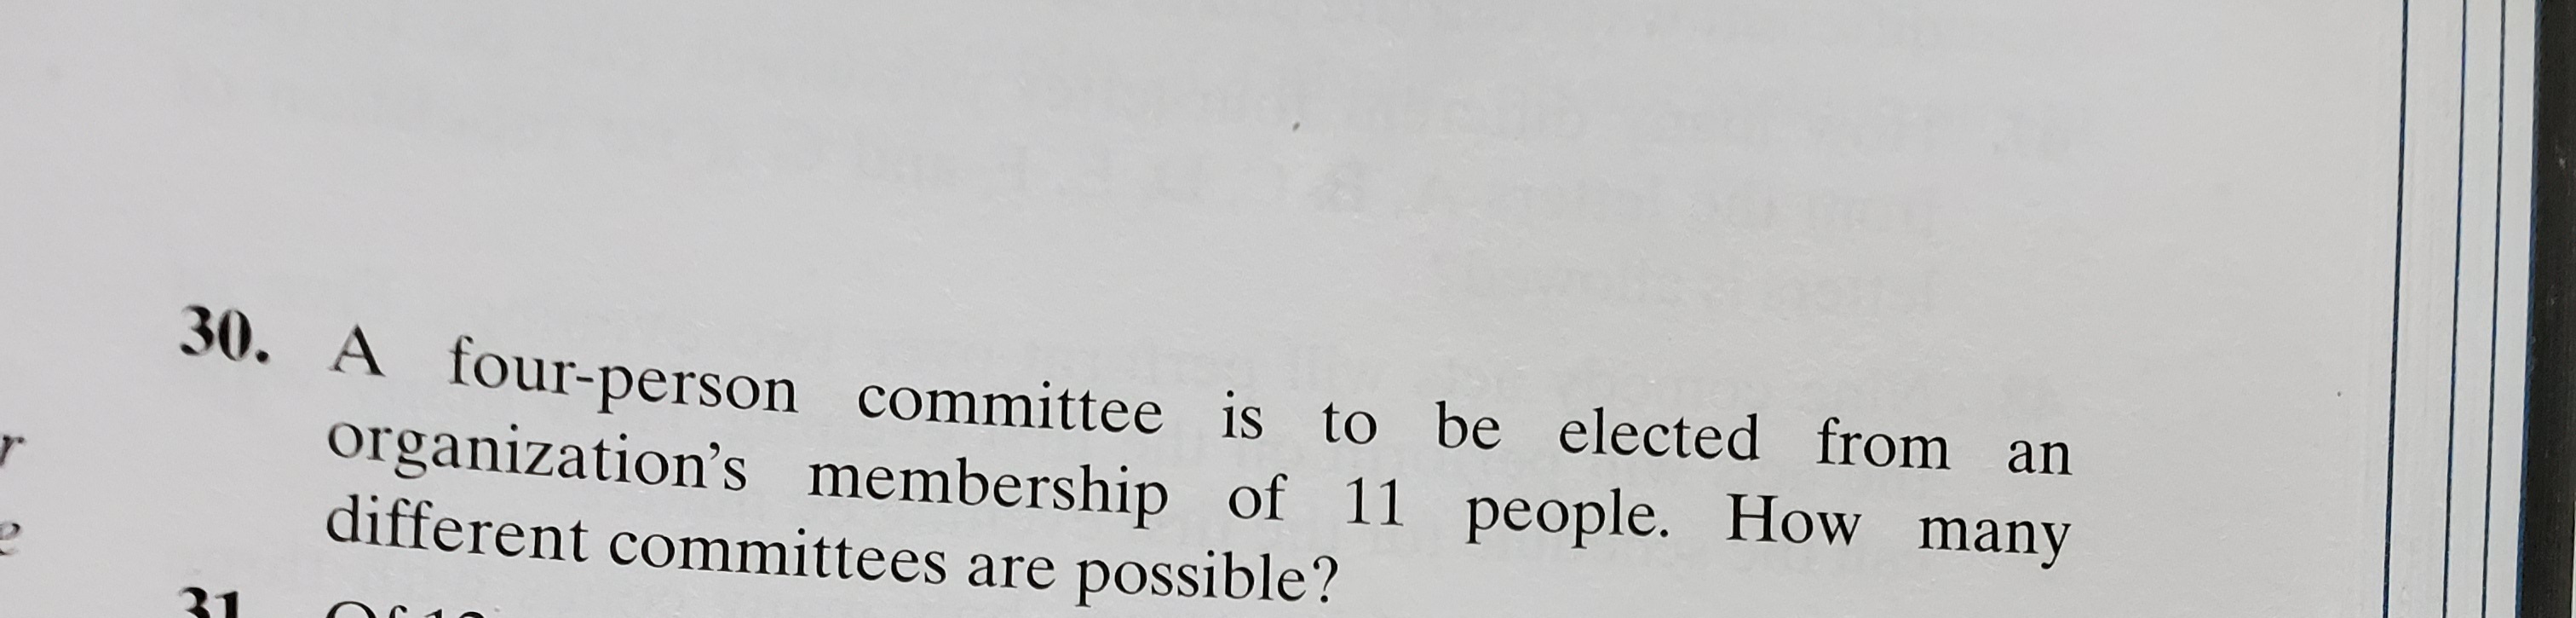 A four-person committee is to be elected from an
organization's membership of 11 people. How many
different committees are nossihle?
